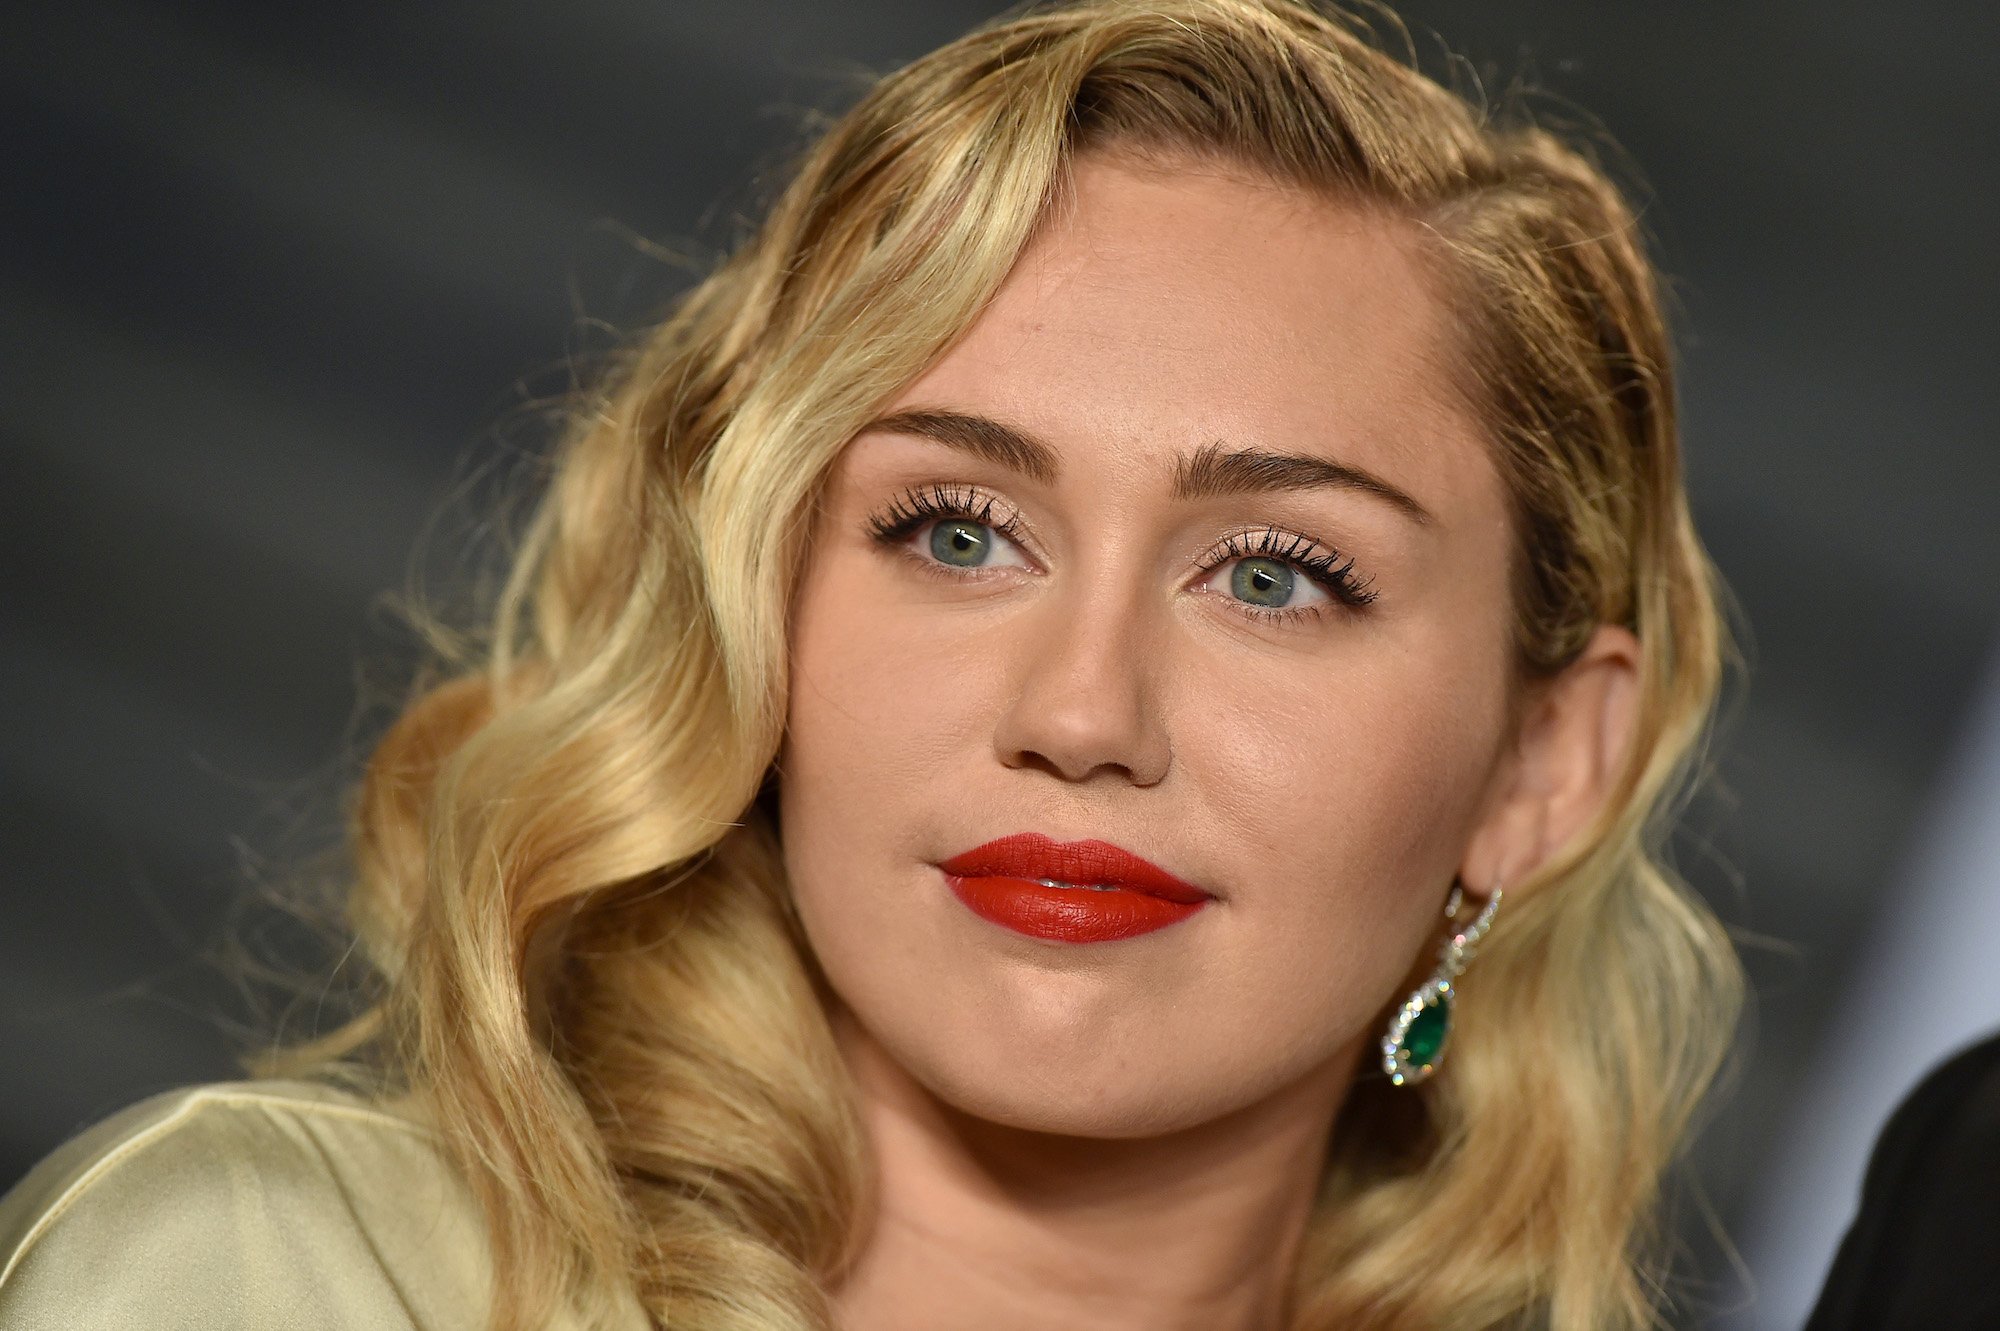 Miley Cyrus slightly smiling, wearing red lipstick, in front of a blurred background